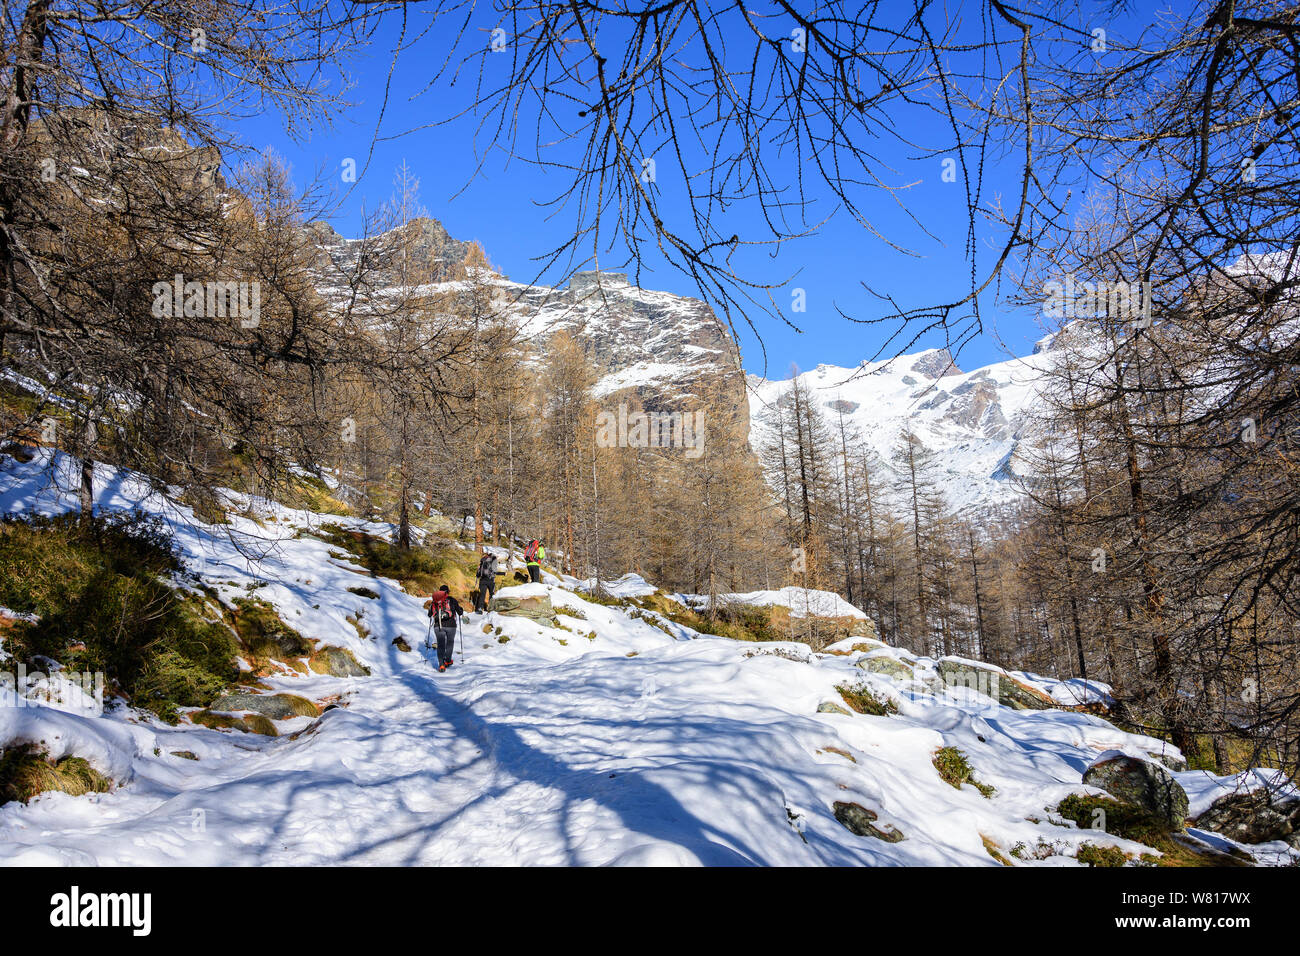 Group of hikers trekking in the mountains of the Alps. The trekkers are going through a snowy forest. Italy Stock Photo